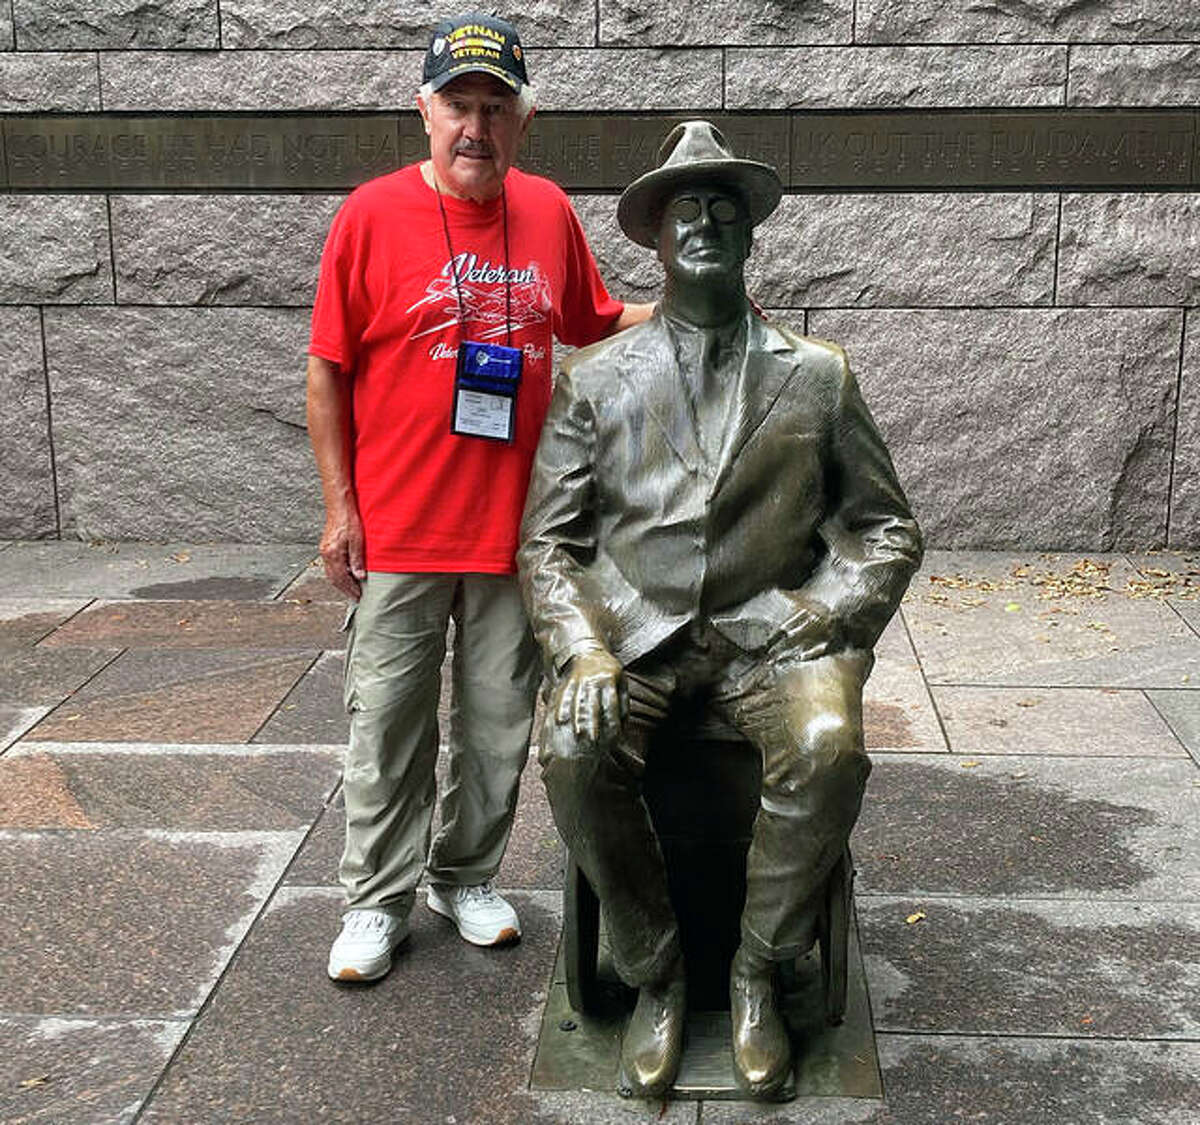 Jim Mareing poses with a statue of FDR at the Franklin Delano Roosevelt Memorial in Washington, D.C.